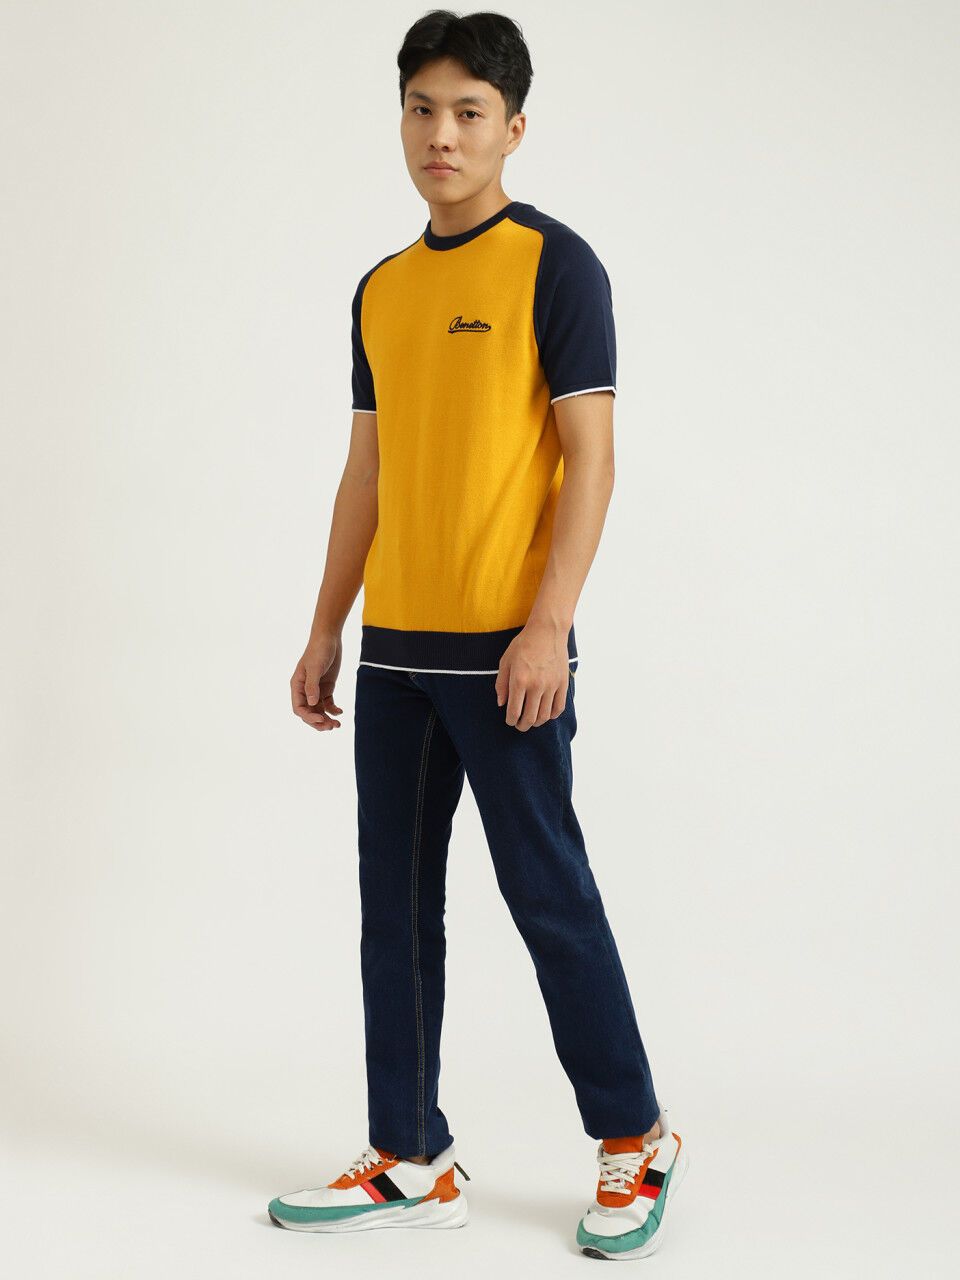 United Colors Of Benetton Yellow And Navy Blue T-Shirt